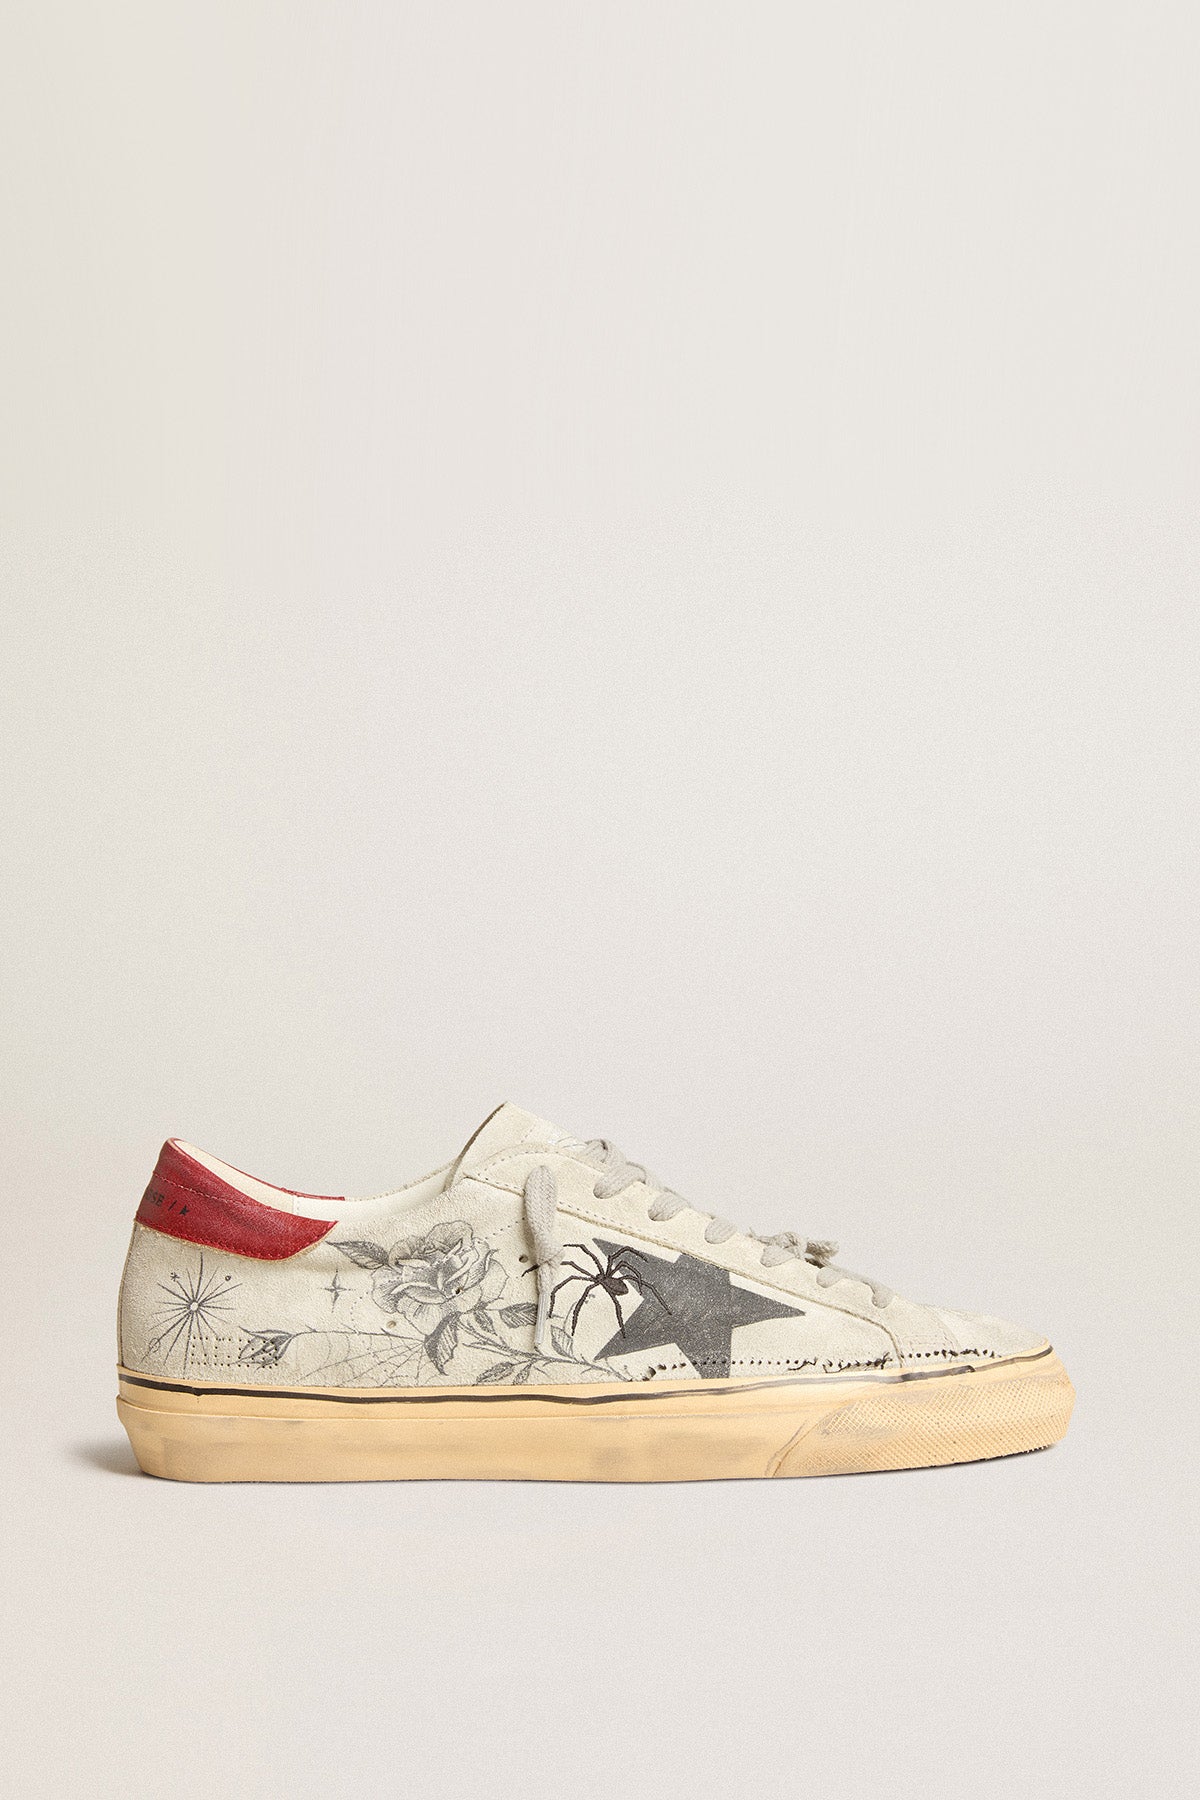 Syd Klan Limited GOLDEN GOOSE HAUS - DREAMED BY DR. WOO | SUPER-STAR SUEDE SNEAKERS –  MAXFIELD LA